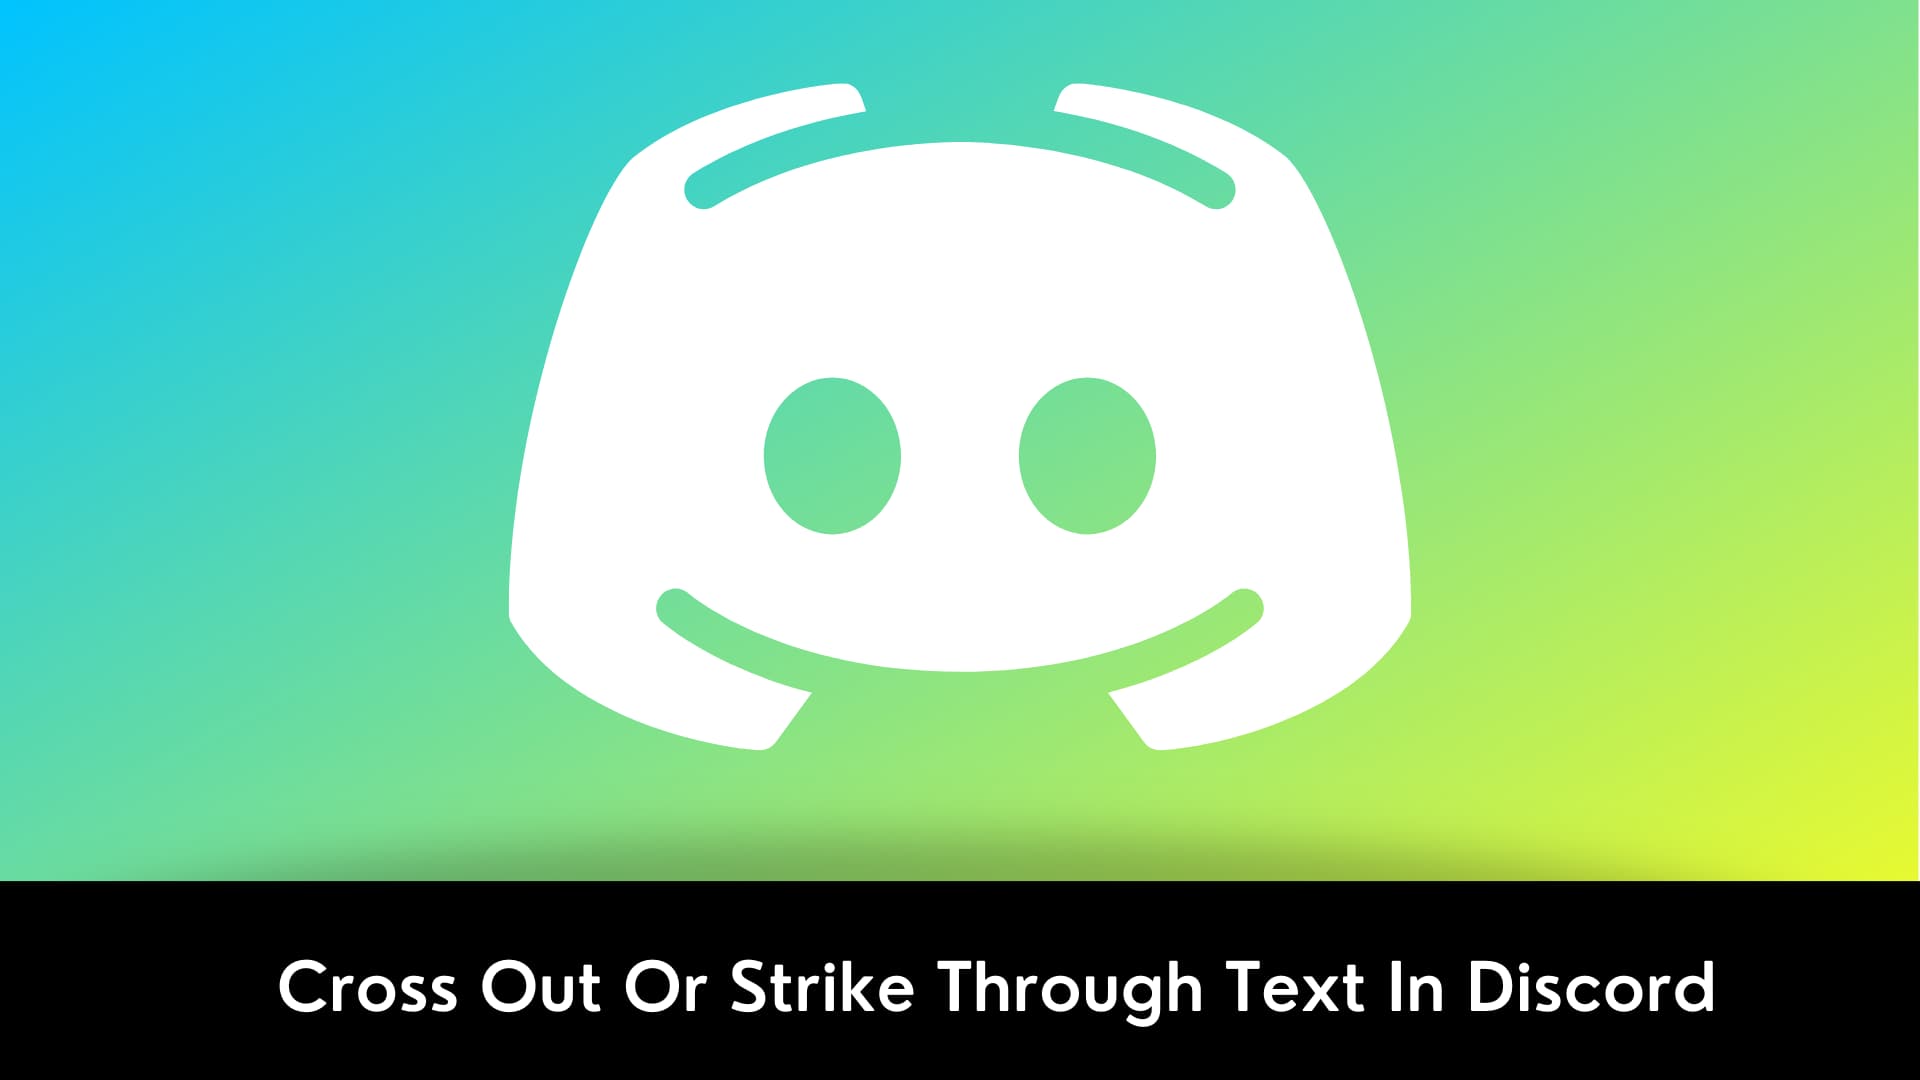 Cross Out Or Strike Through Text In Discord